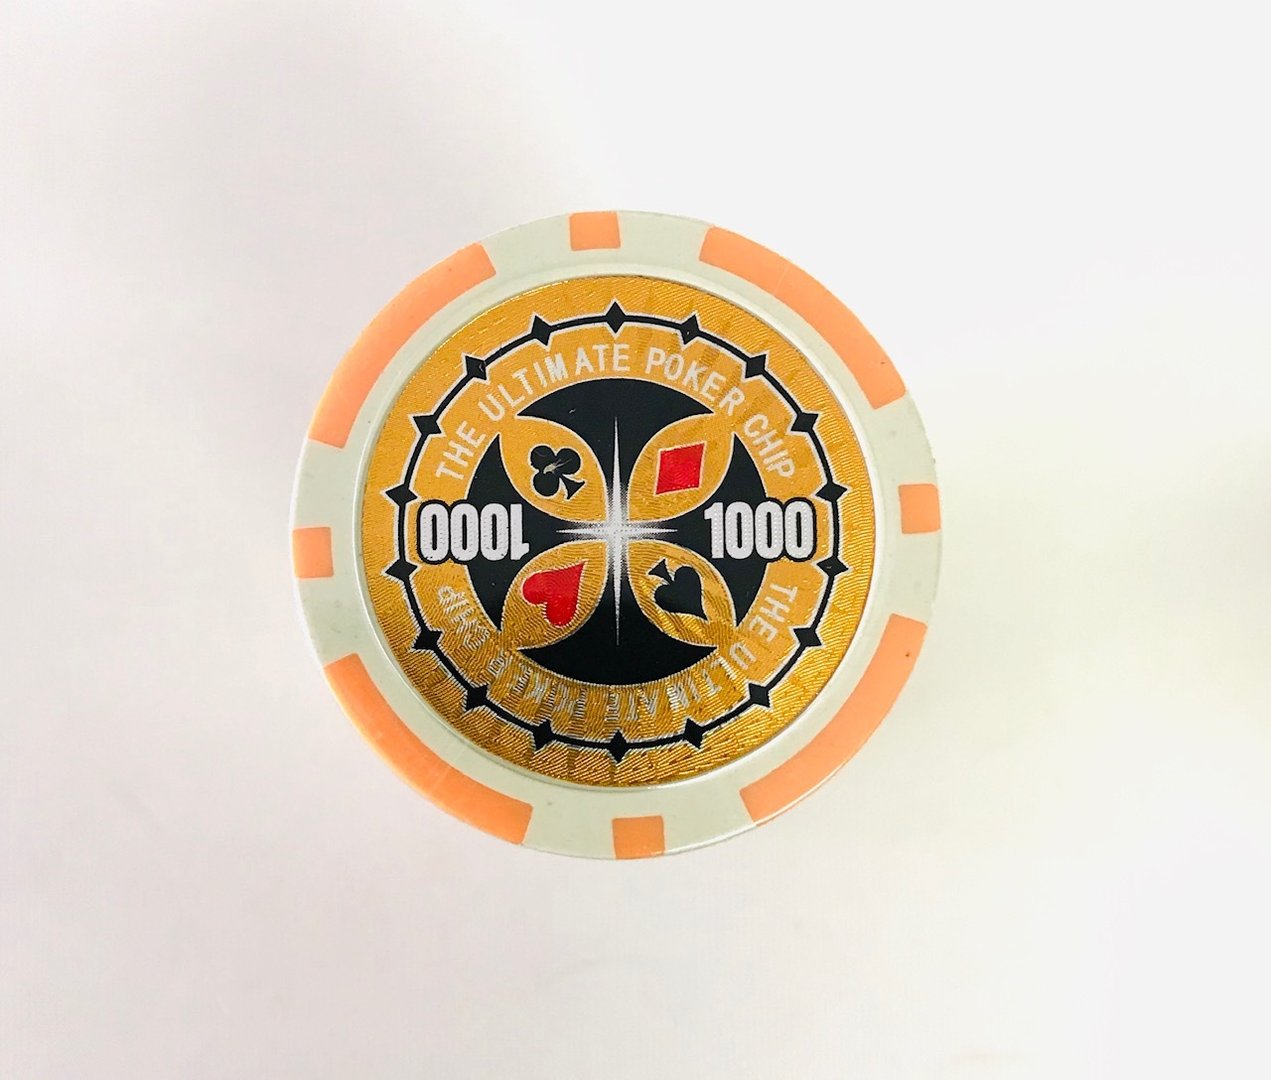 25 Poker Chips 13g clay value 1000 Yellow Metal Core Ultimate Poker Laser Clay 